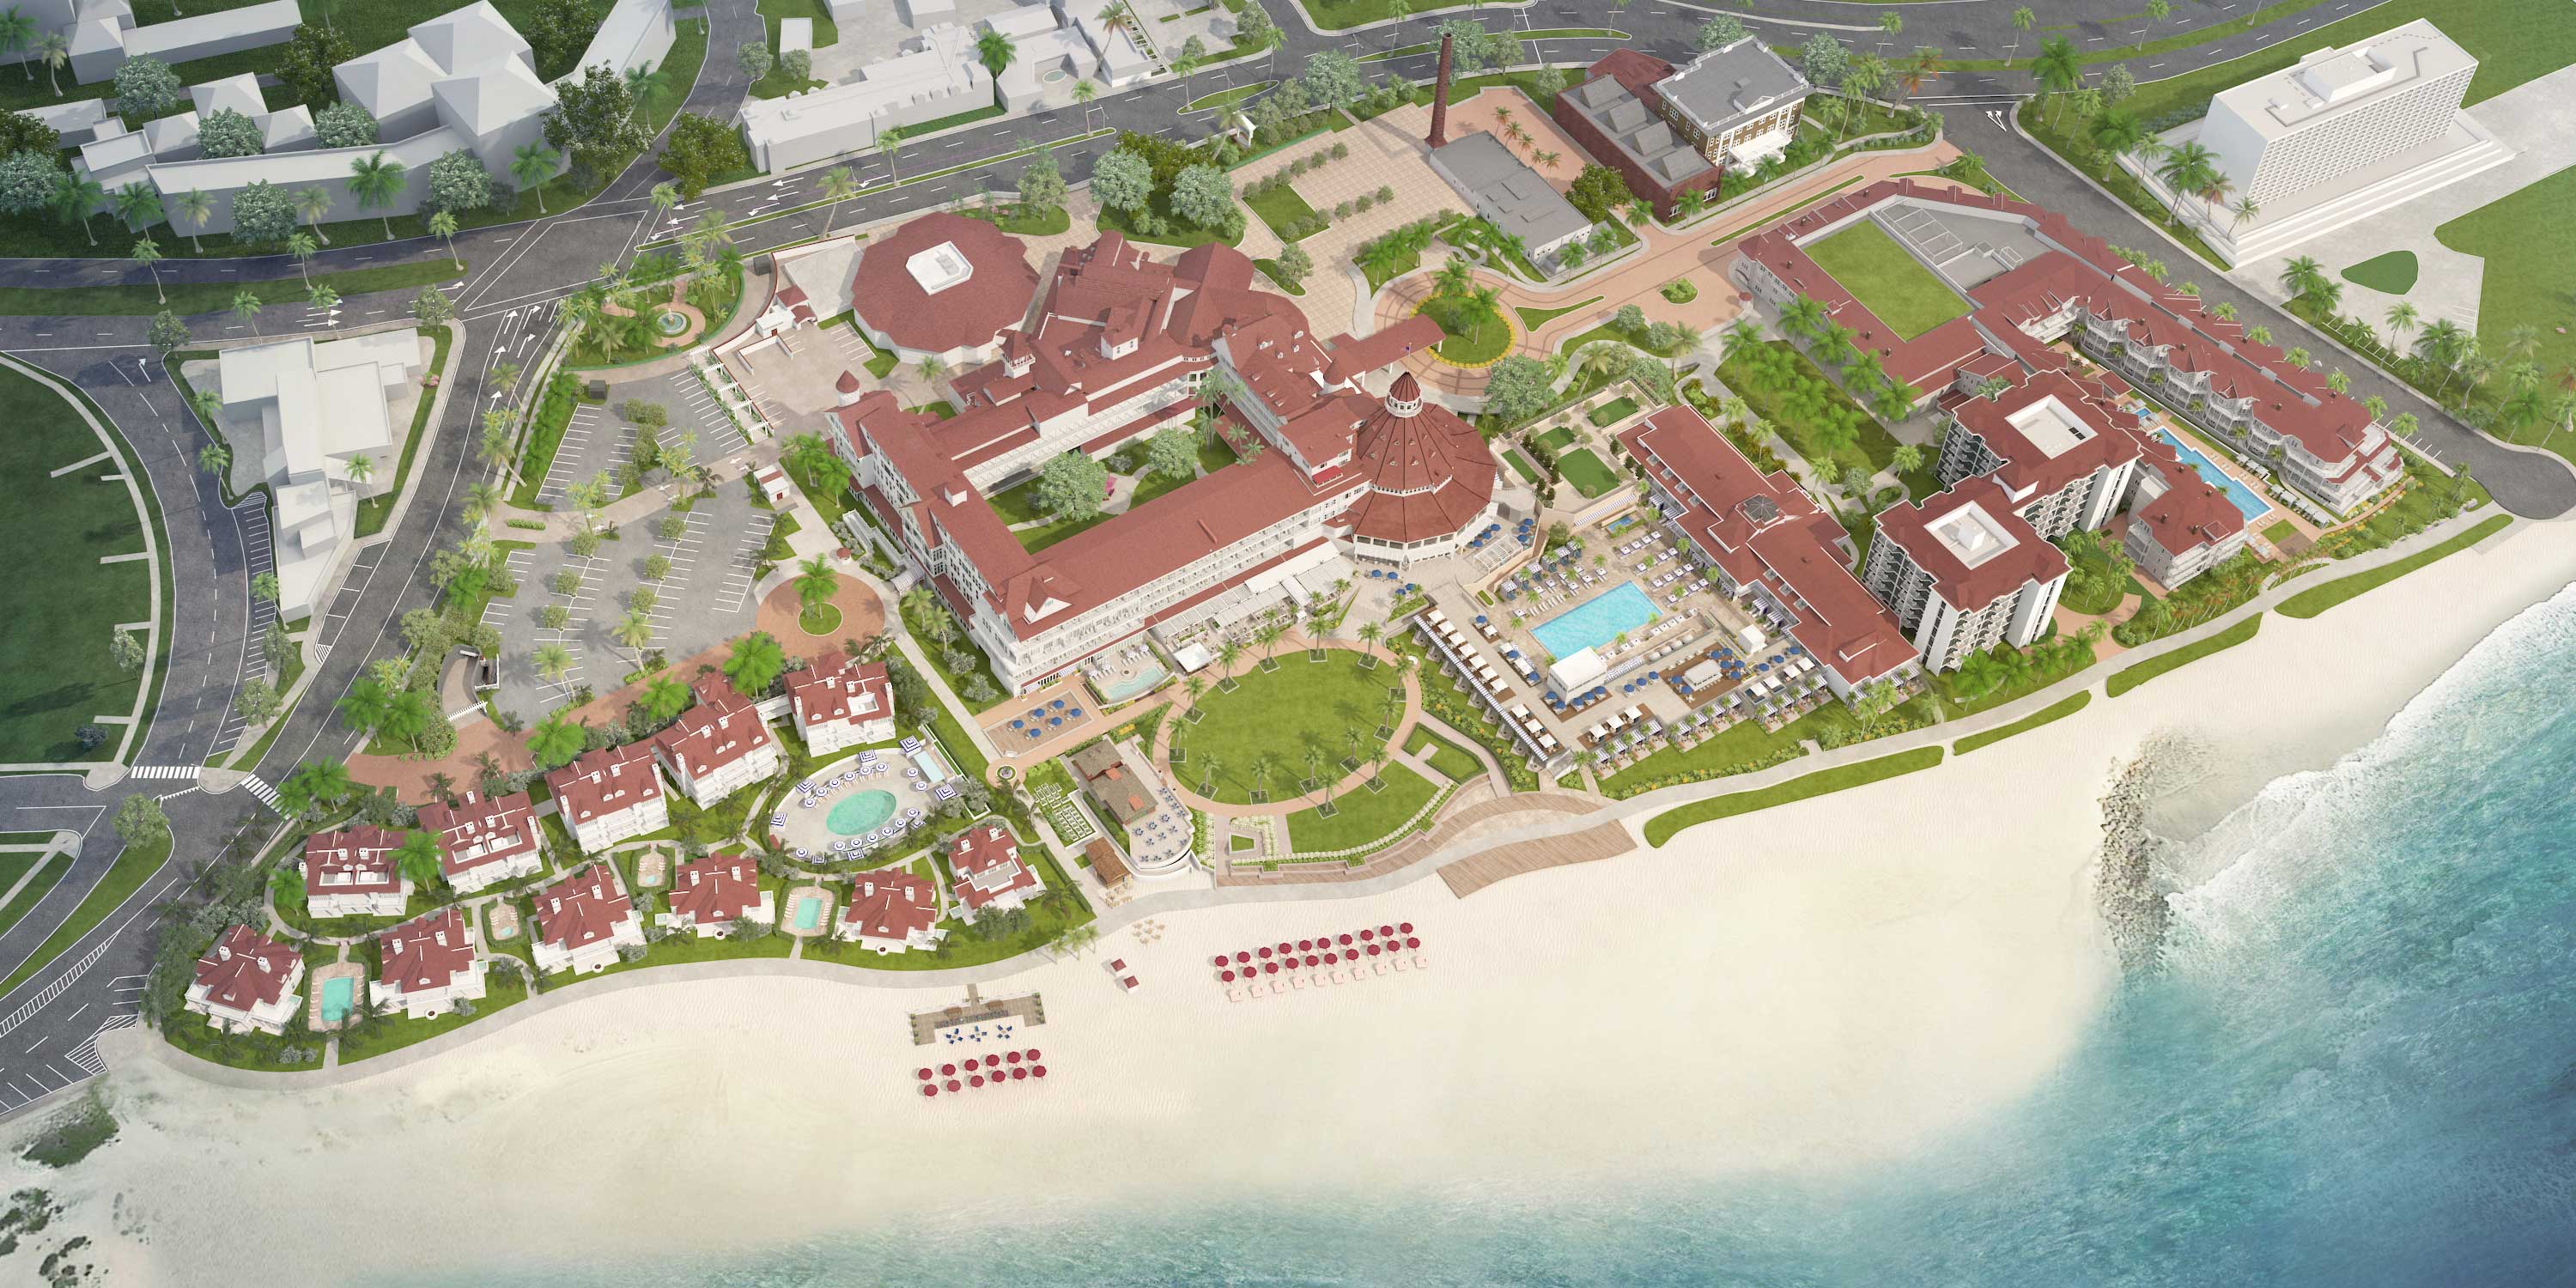 The Hotel del Coronado Property Map with Master Plan Completed